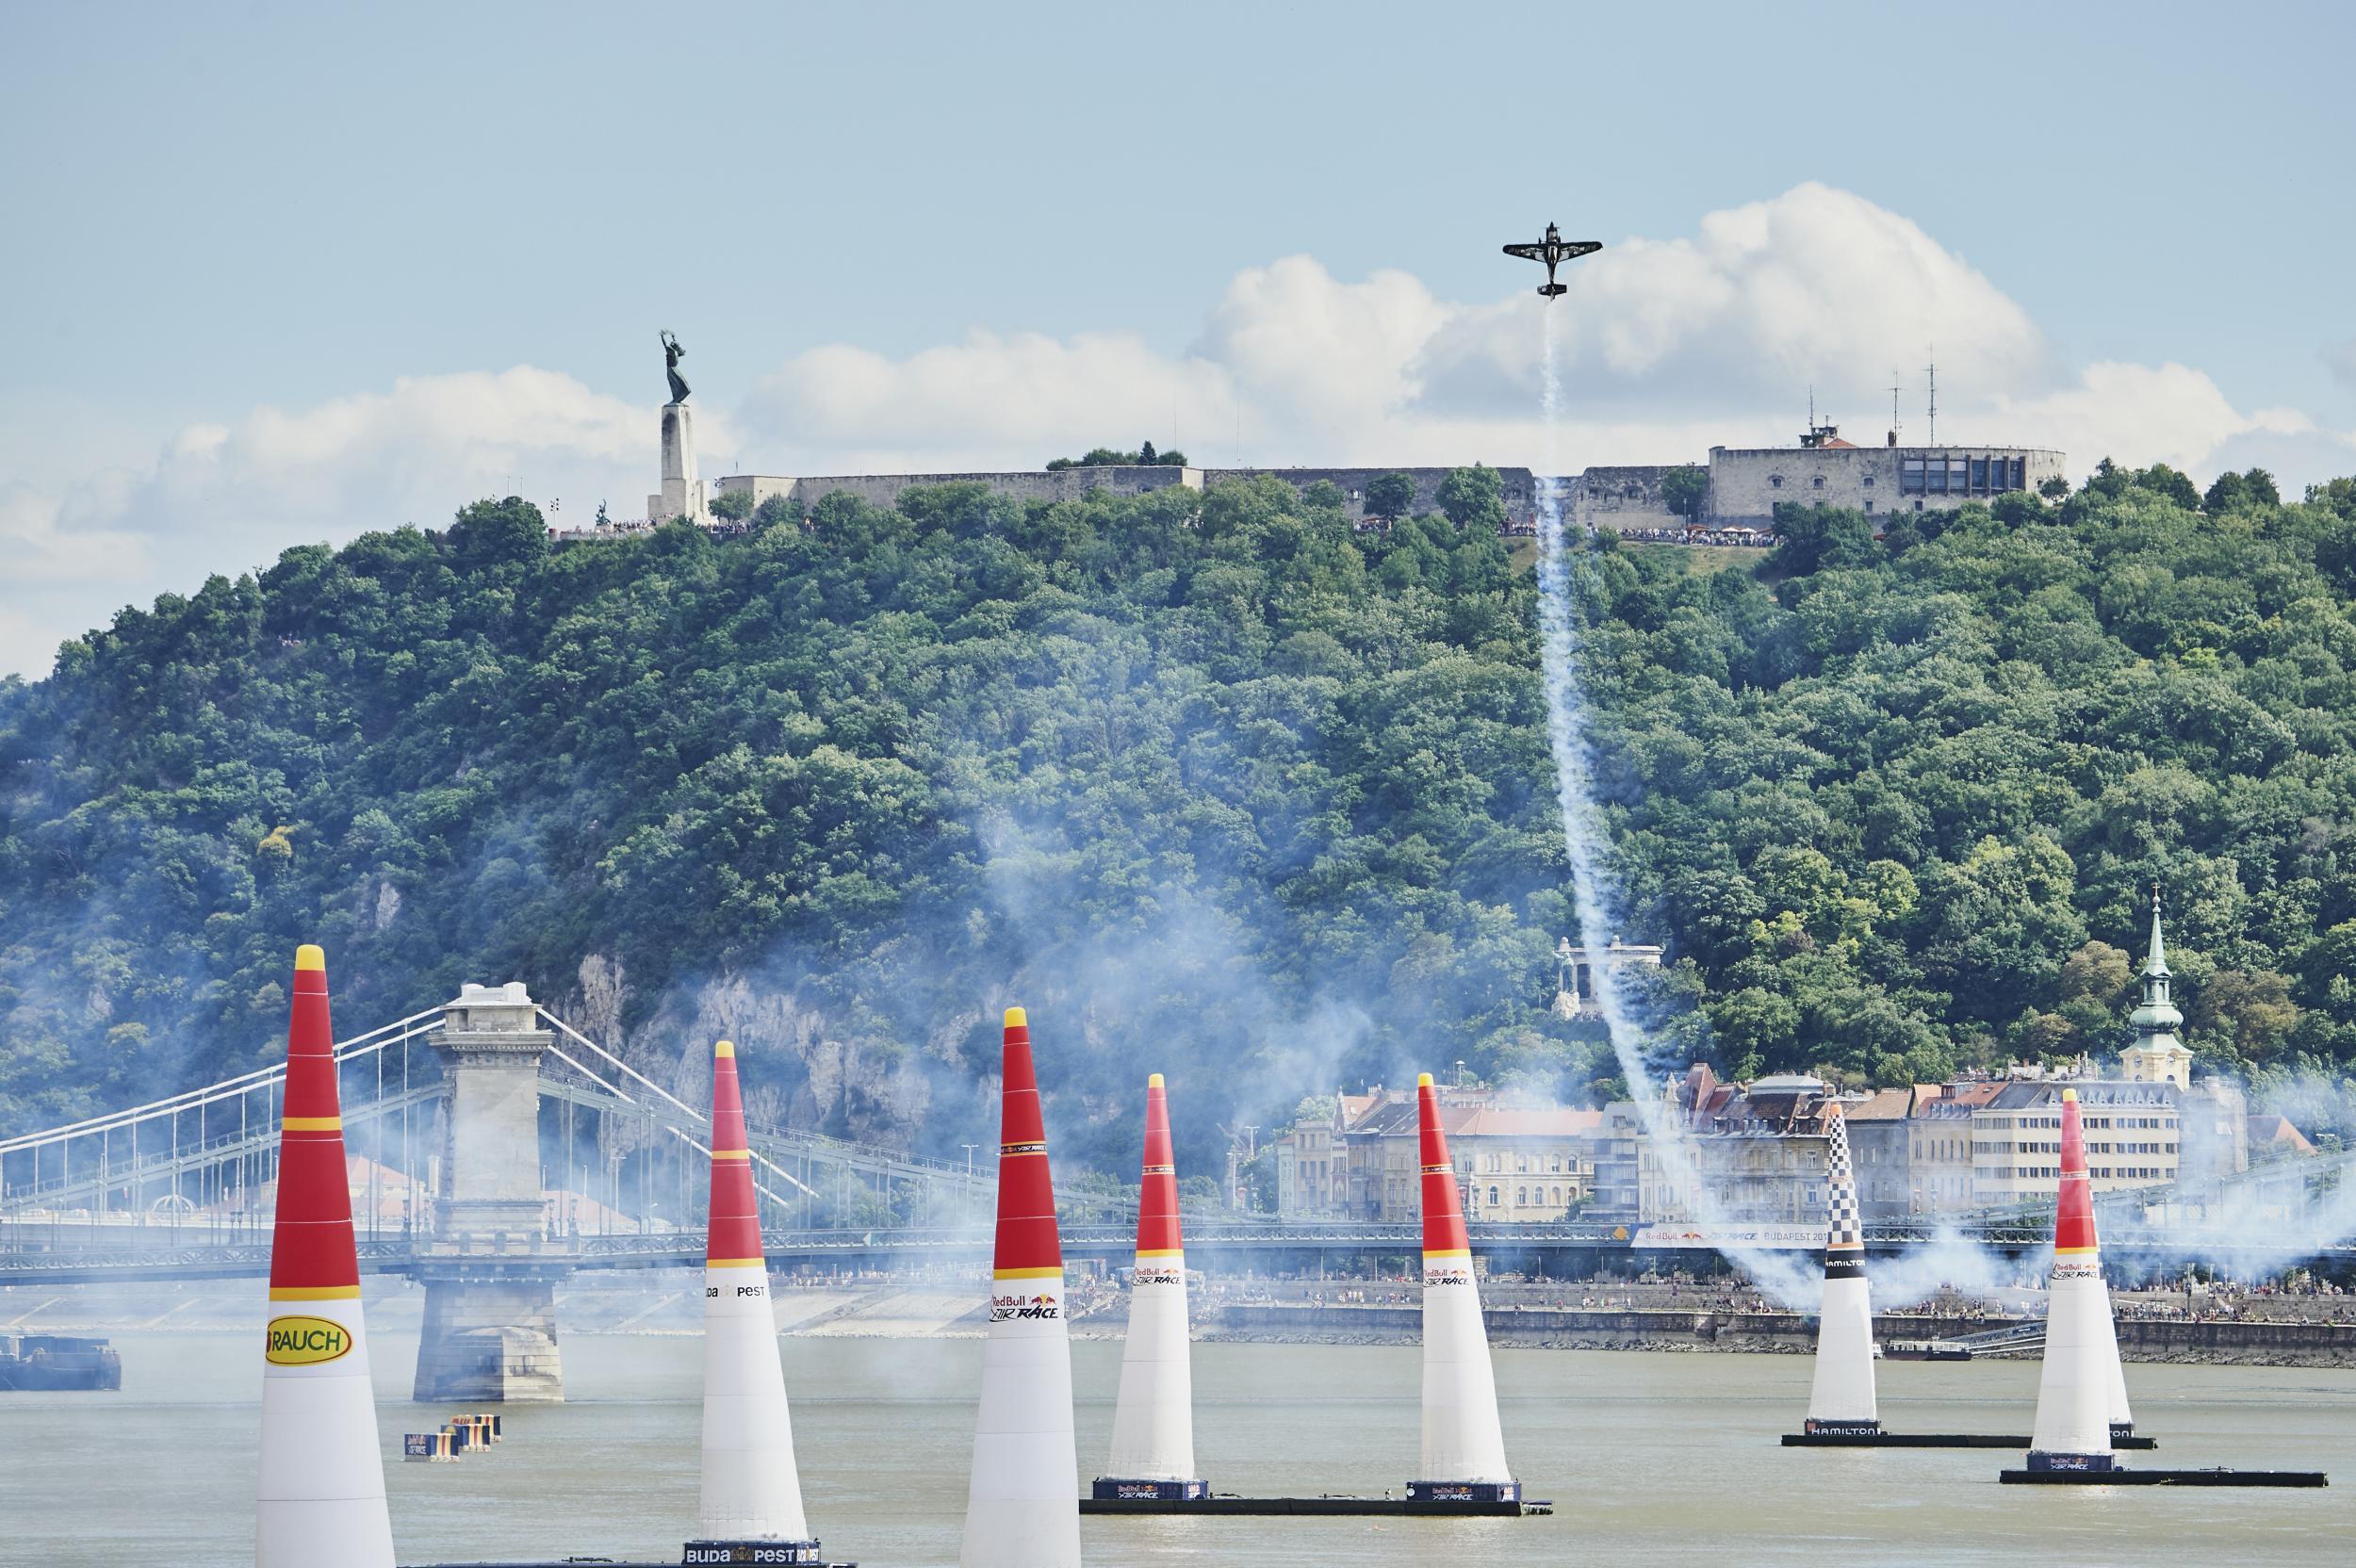 The Red Bull Air Race in Budapest last weekend